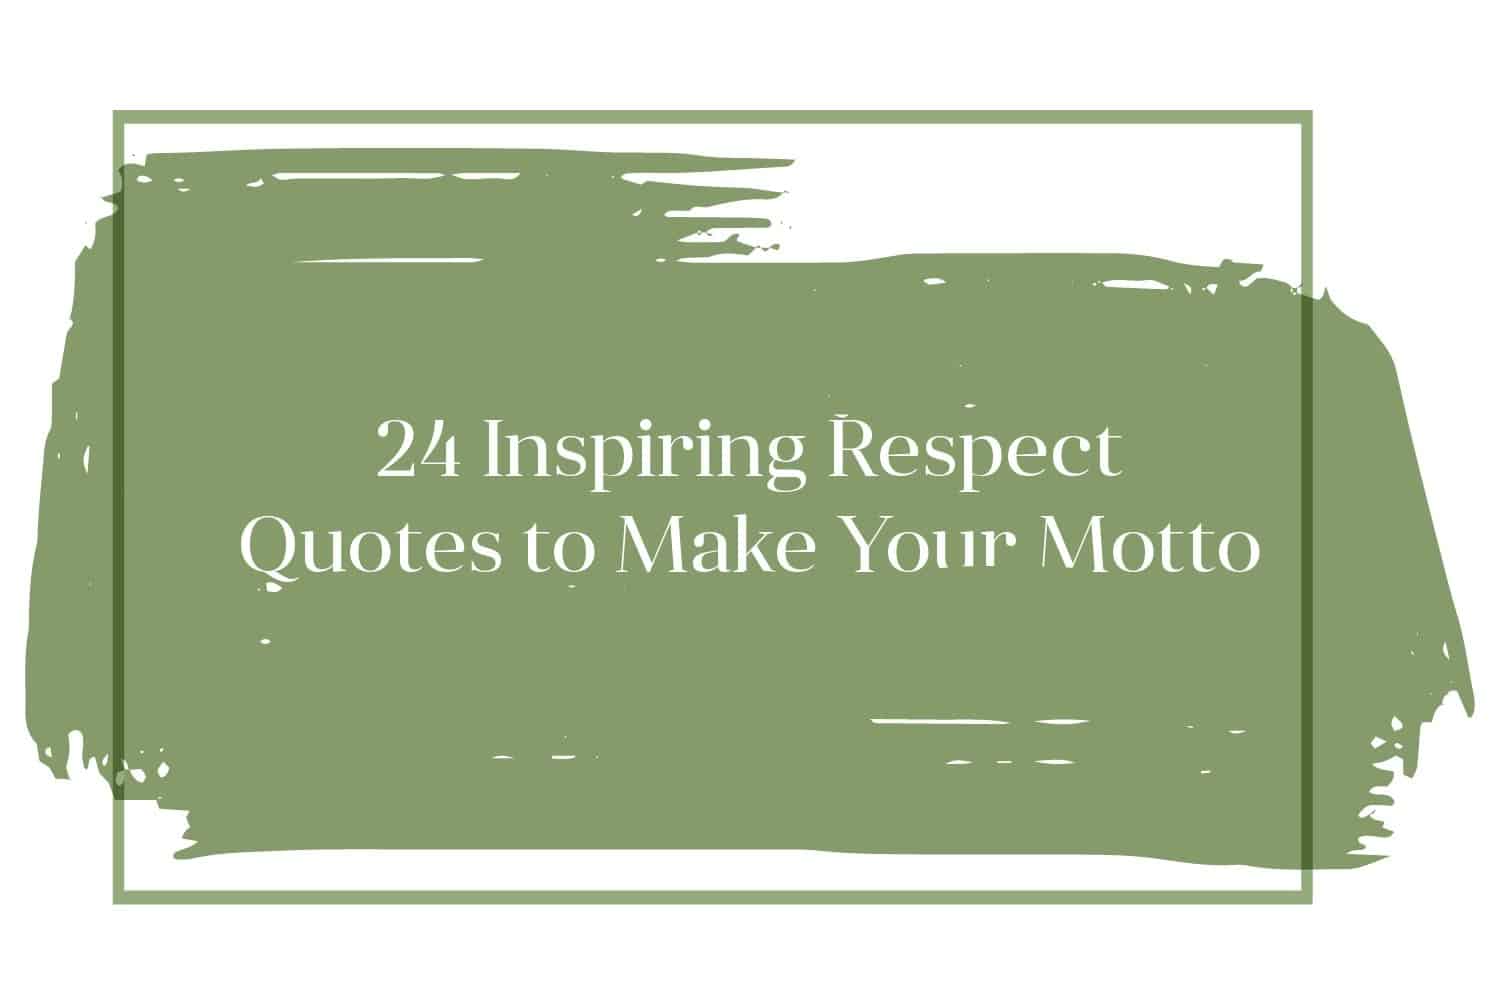 24-inspiring-respect-quotes-to-make-your-motto-reportwire